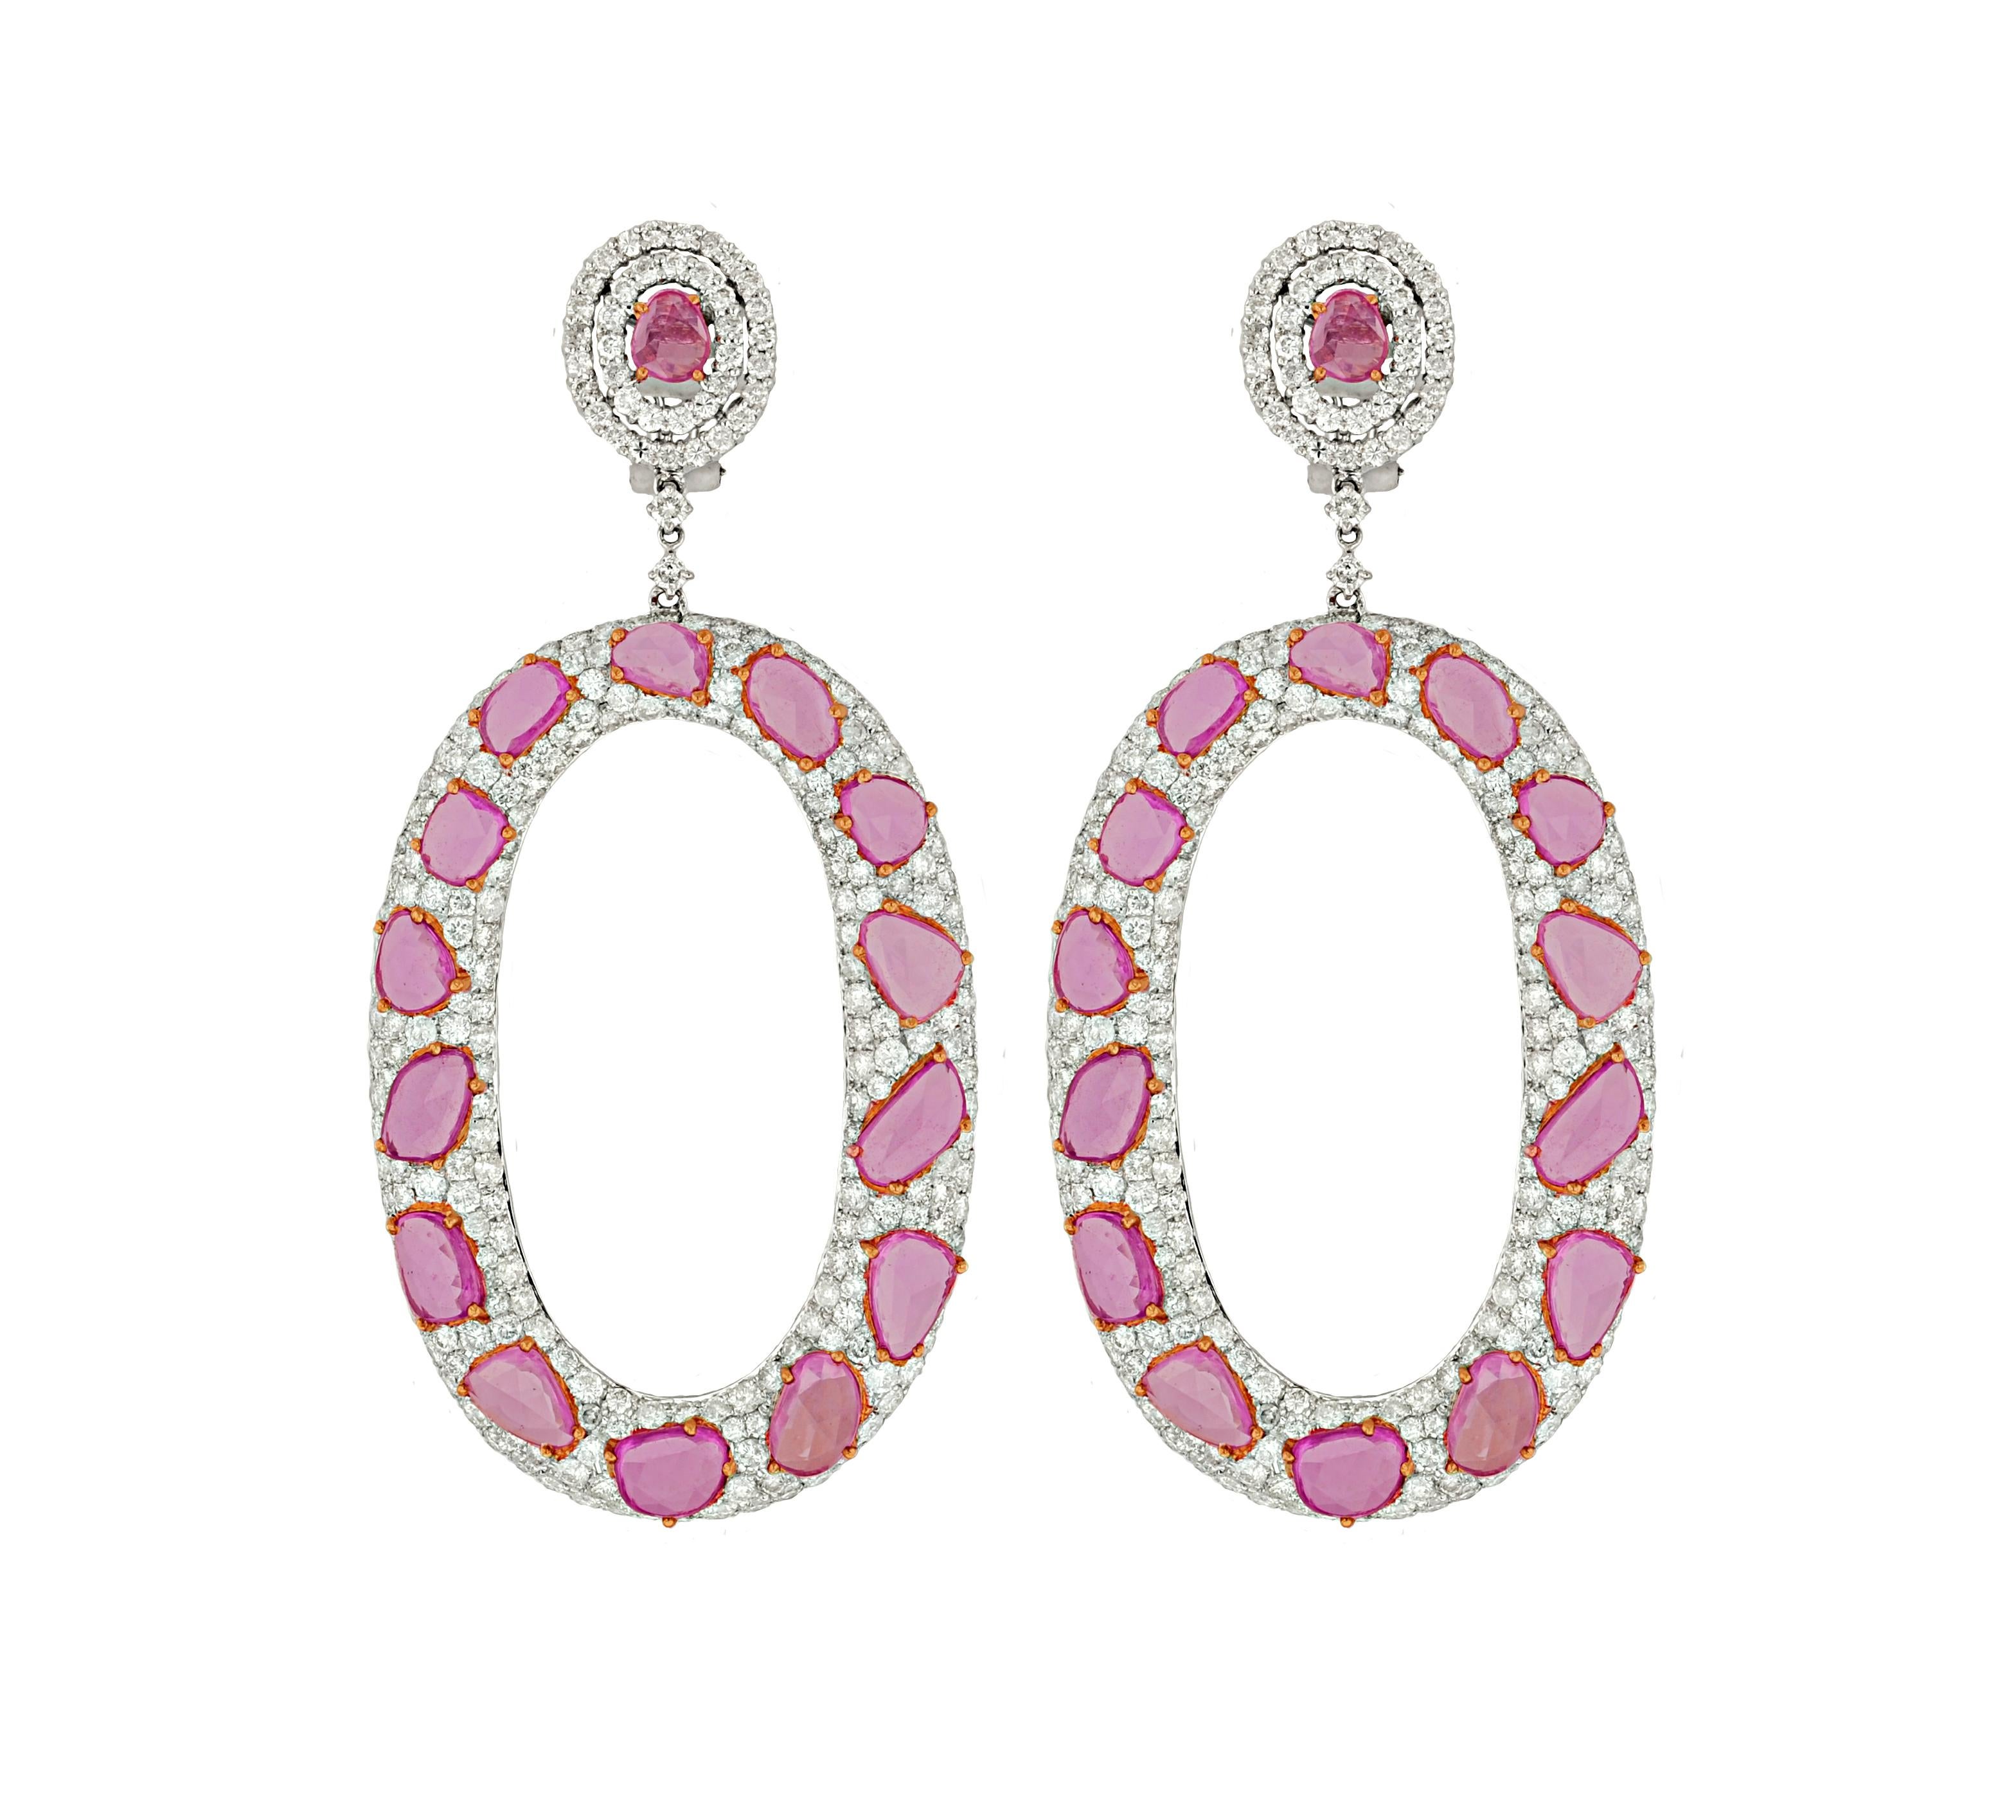 18kt white and yellow gold pink rose cut sapphires and round diamonds bagel  earrings, features 18.73 sap/p + 11.46ct diamonds.
